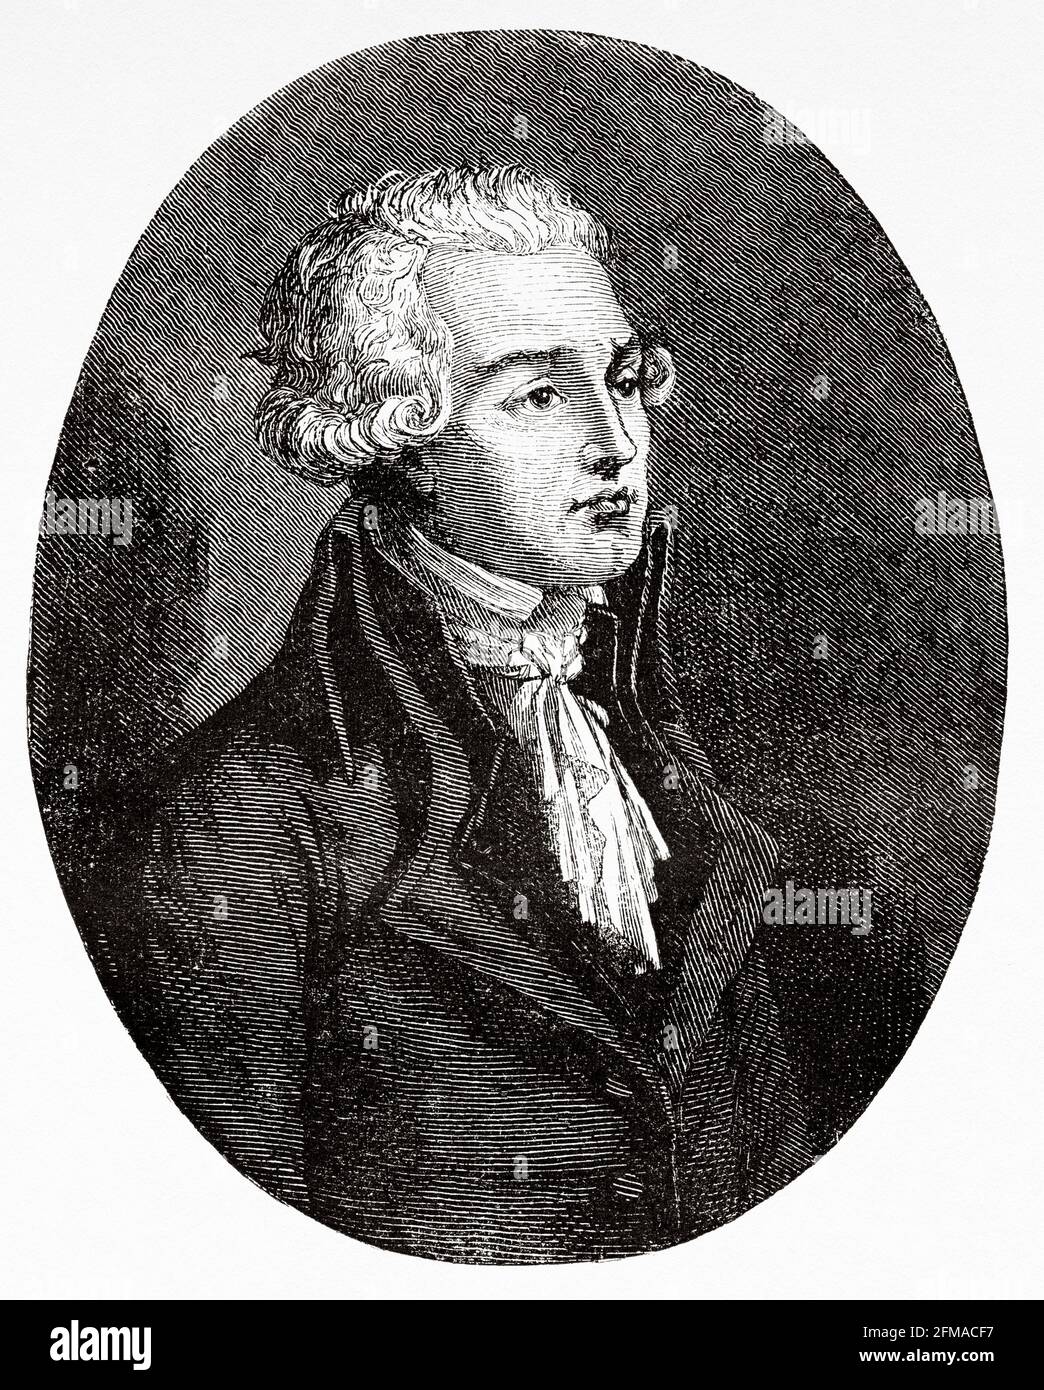 Portrait of young Robespierre. Maximilien Robespierre (1758-1794) Jacobin leader during French Revolution. France. Old 19th century engraved illustration from Histoire de la Revolution Francaise 1876 by Jules Michelet (1798-1874) Stock Photo